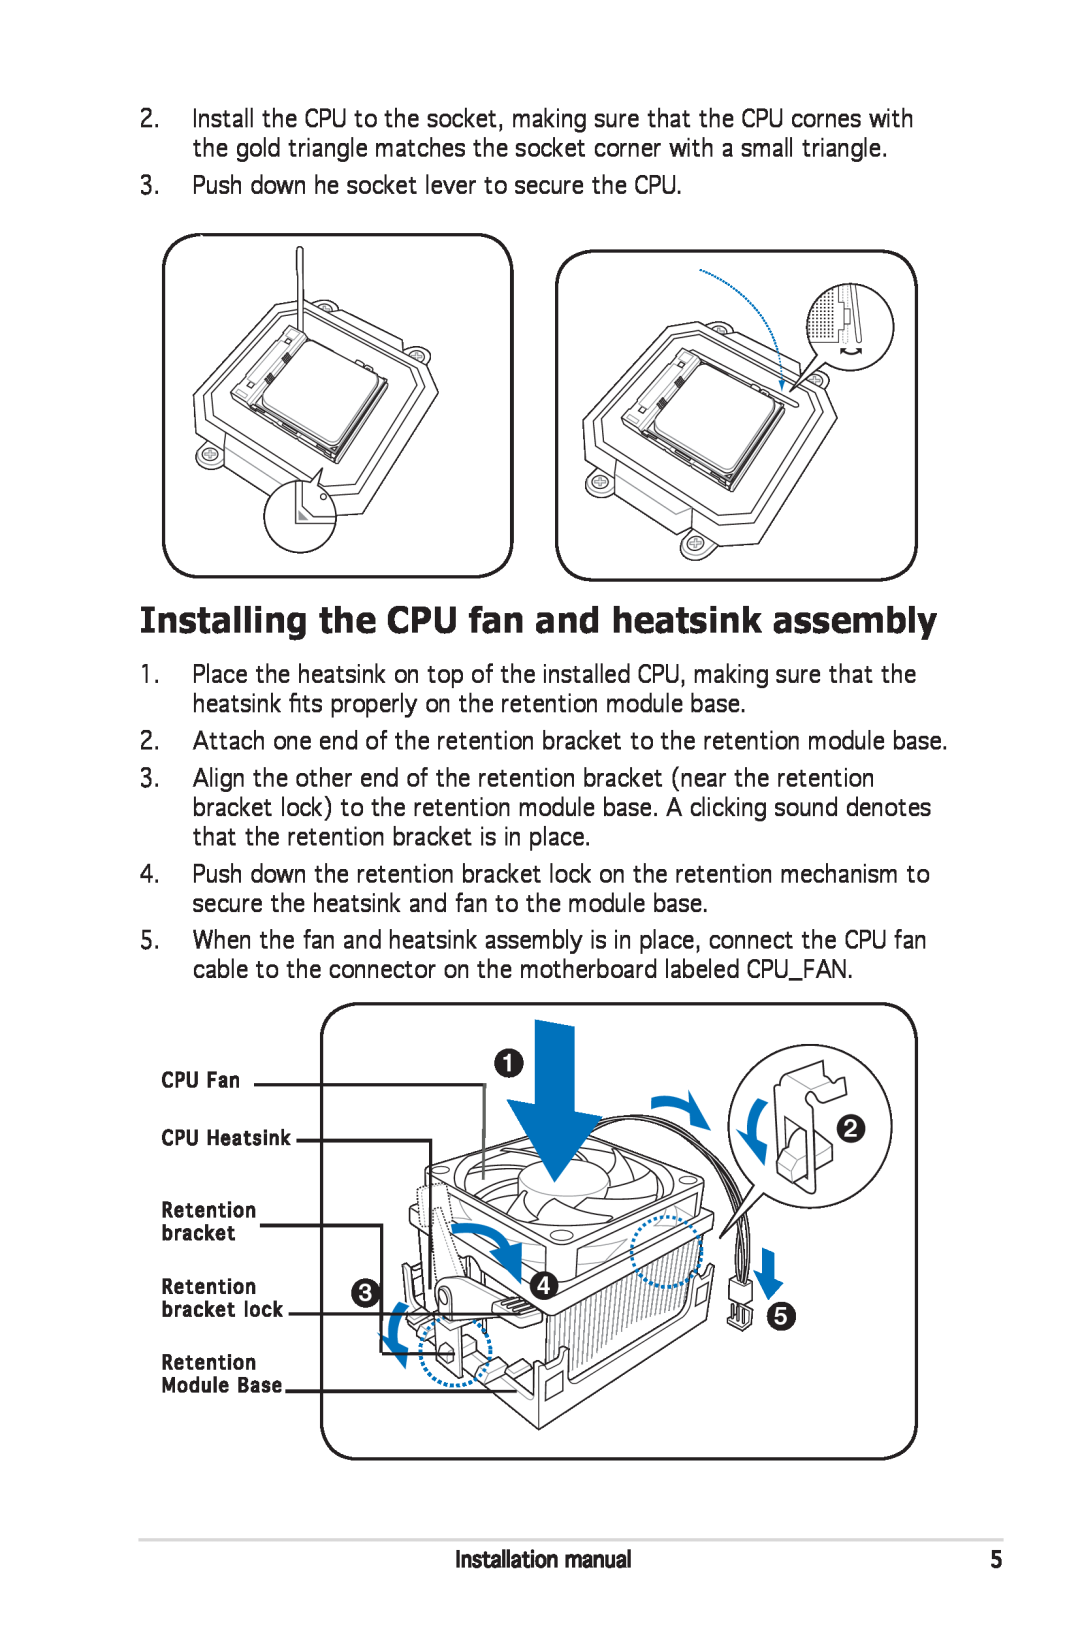 Asus M2NC61S installation manual Installing the CPU fan and heatsink assembly 